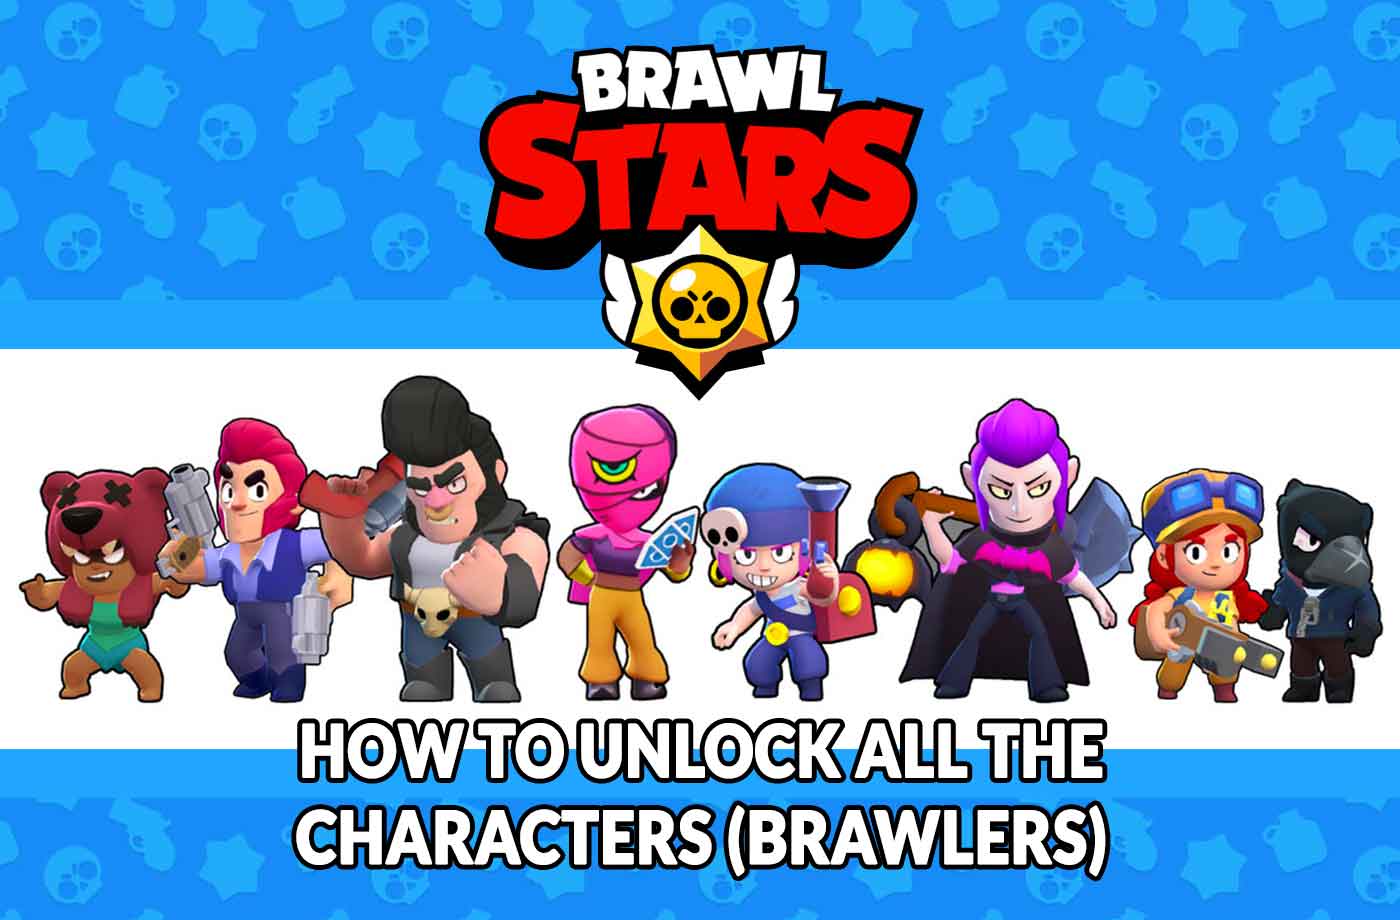 Guide Brawl Stars How To Unlock All The Characters Of The Game